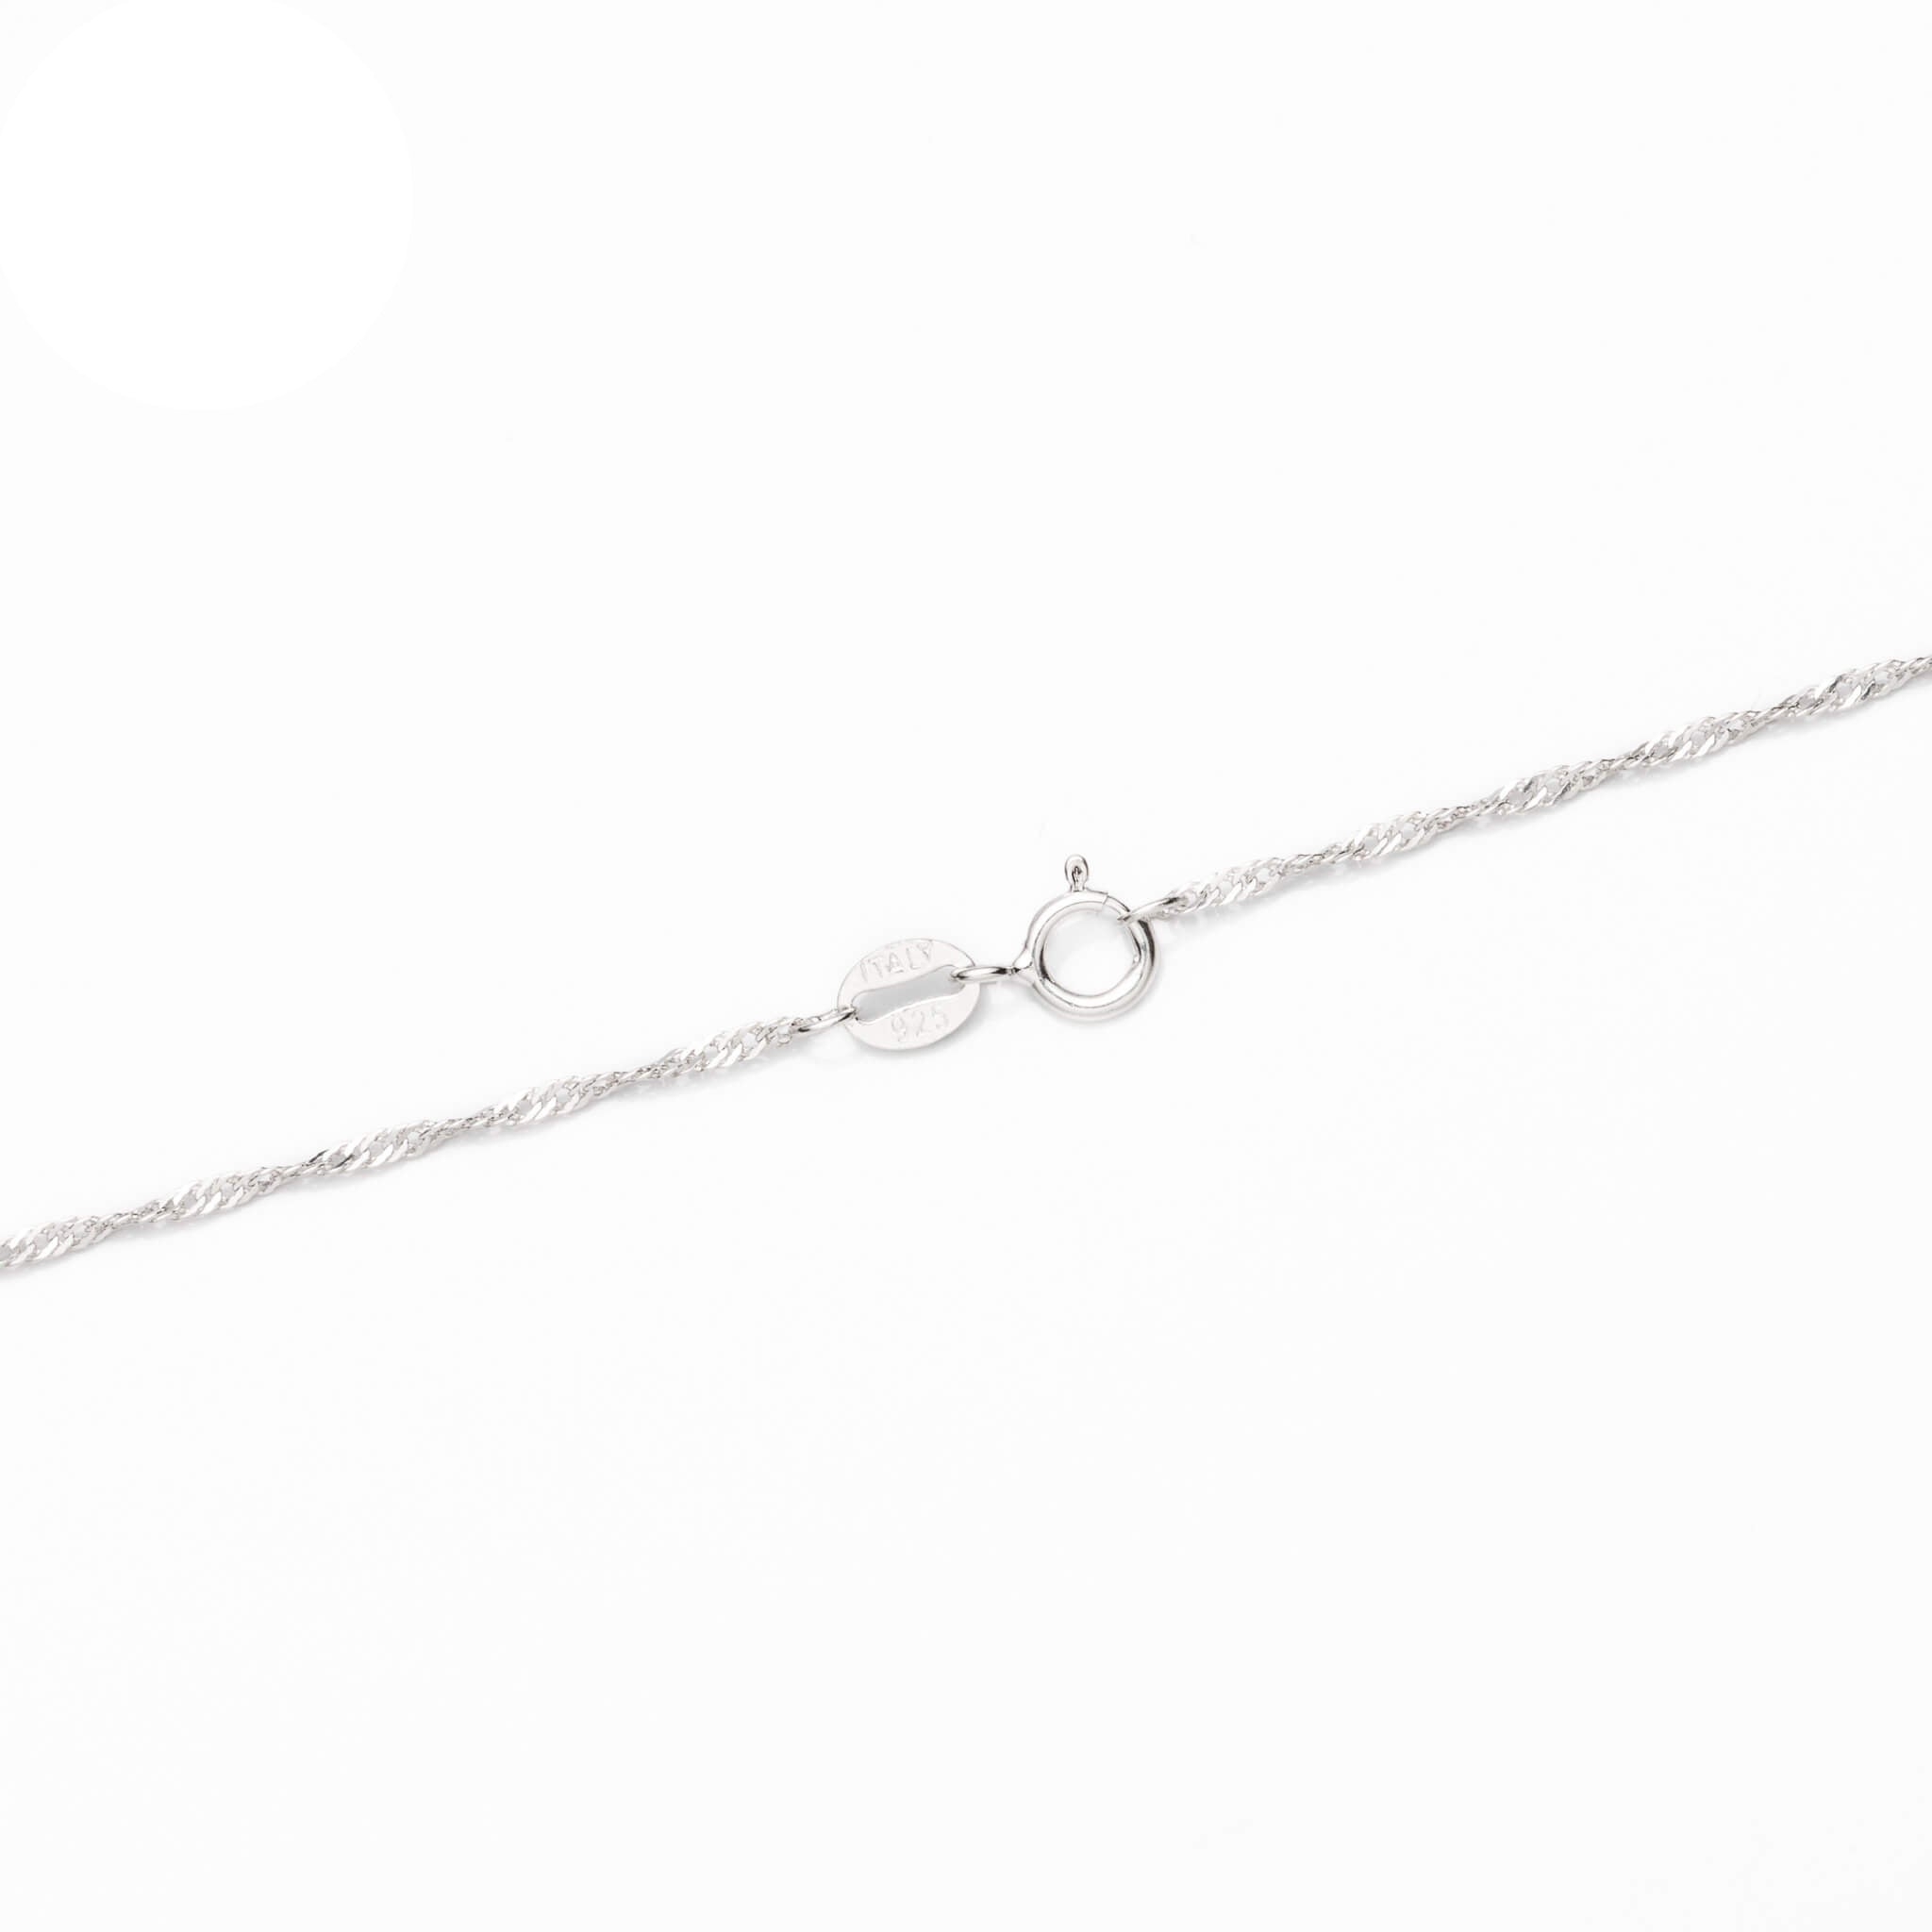 Sterling Silver Twisted Singapore Chain Necklace 1.4mm 16